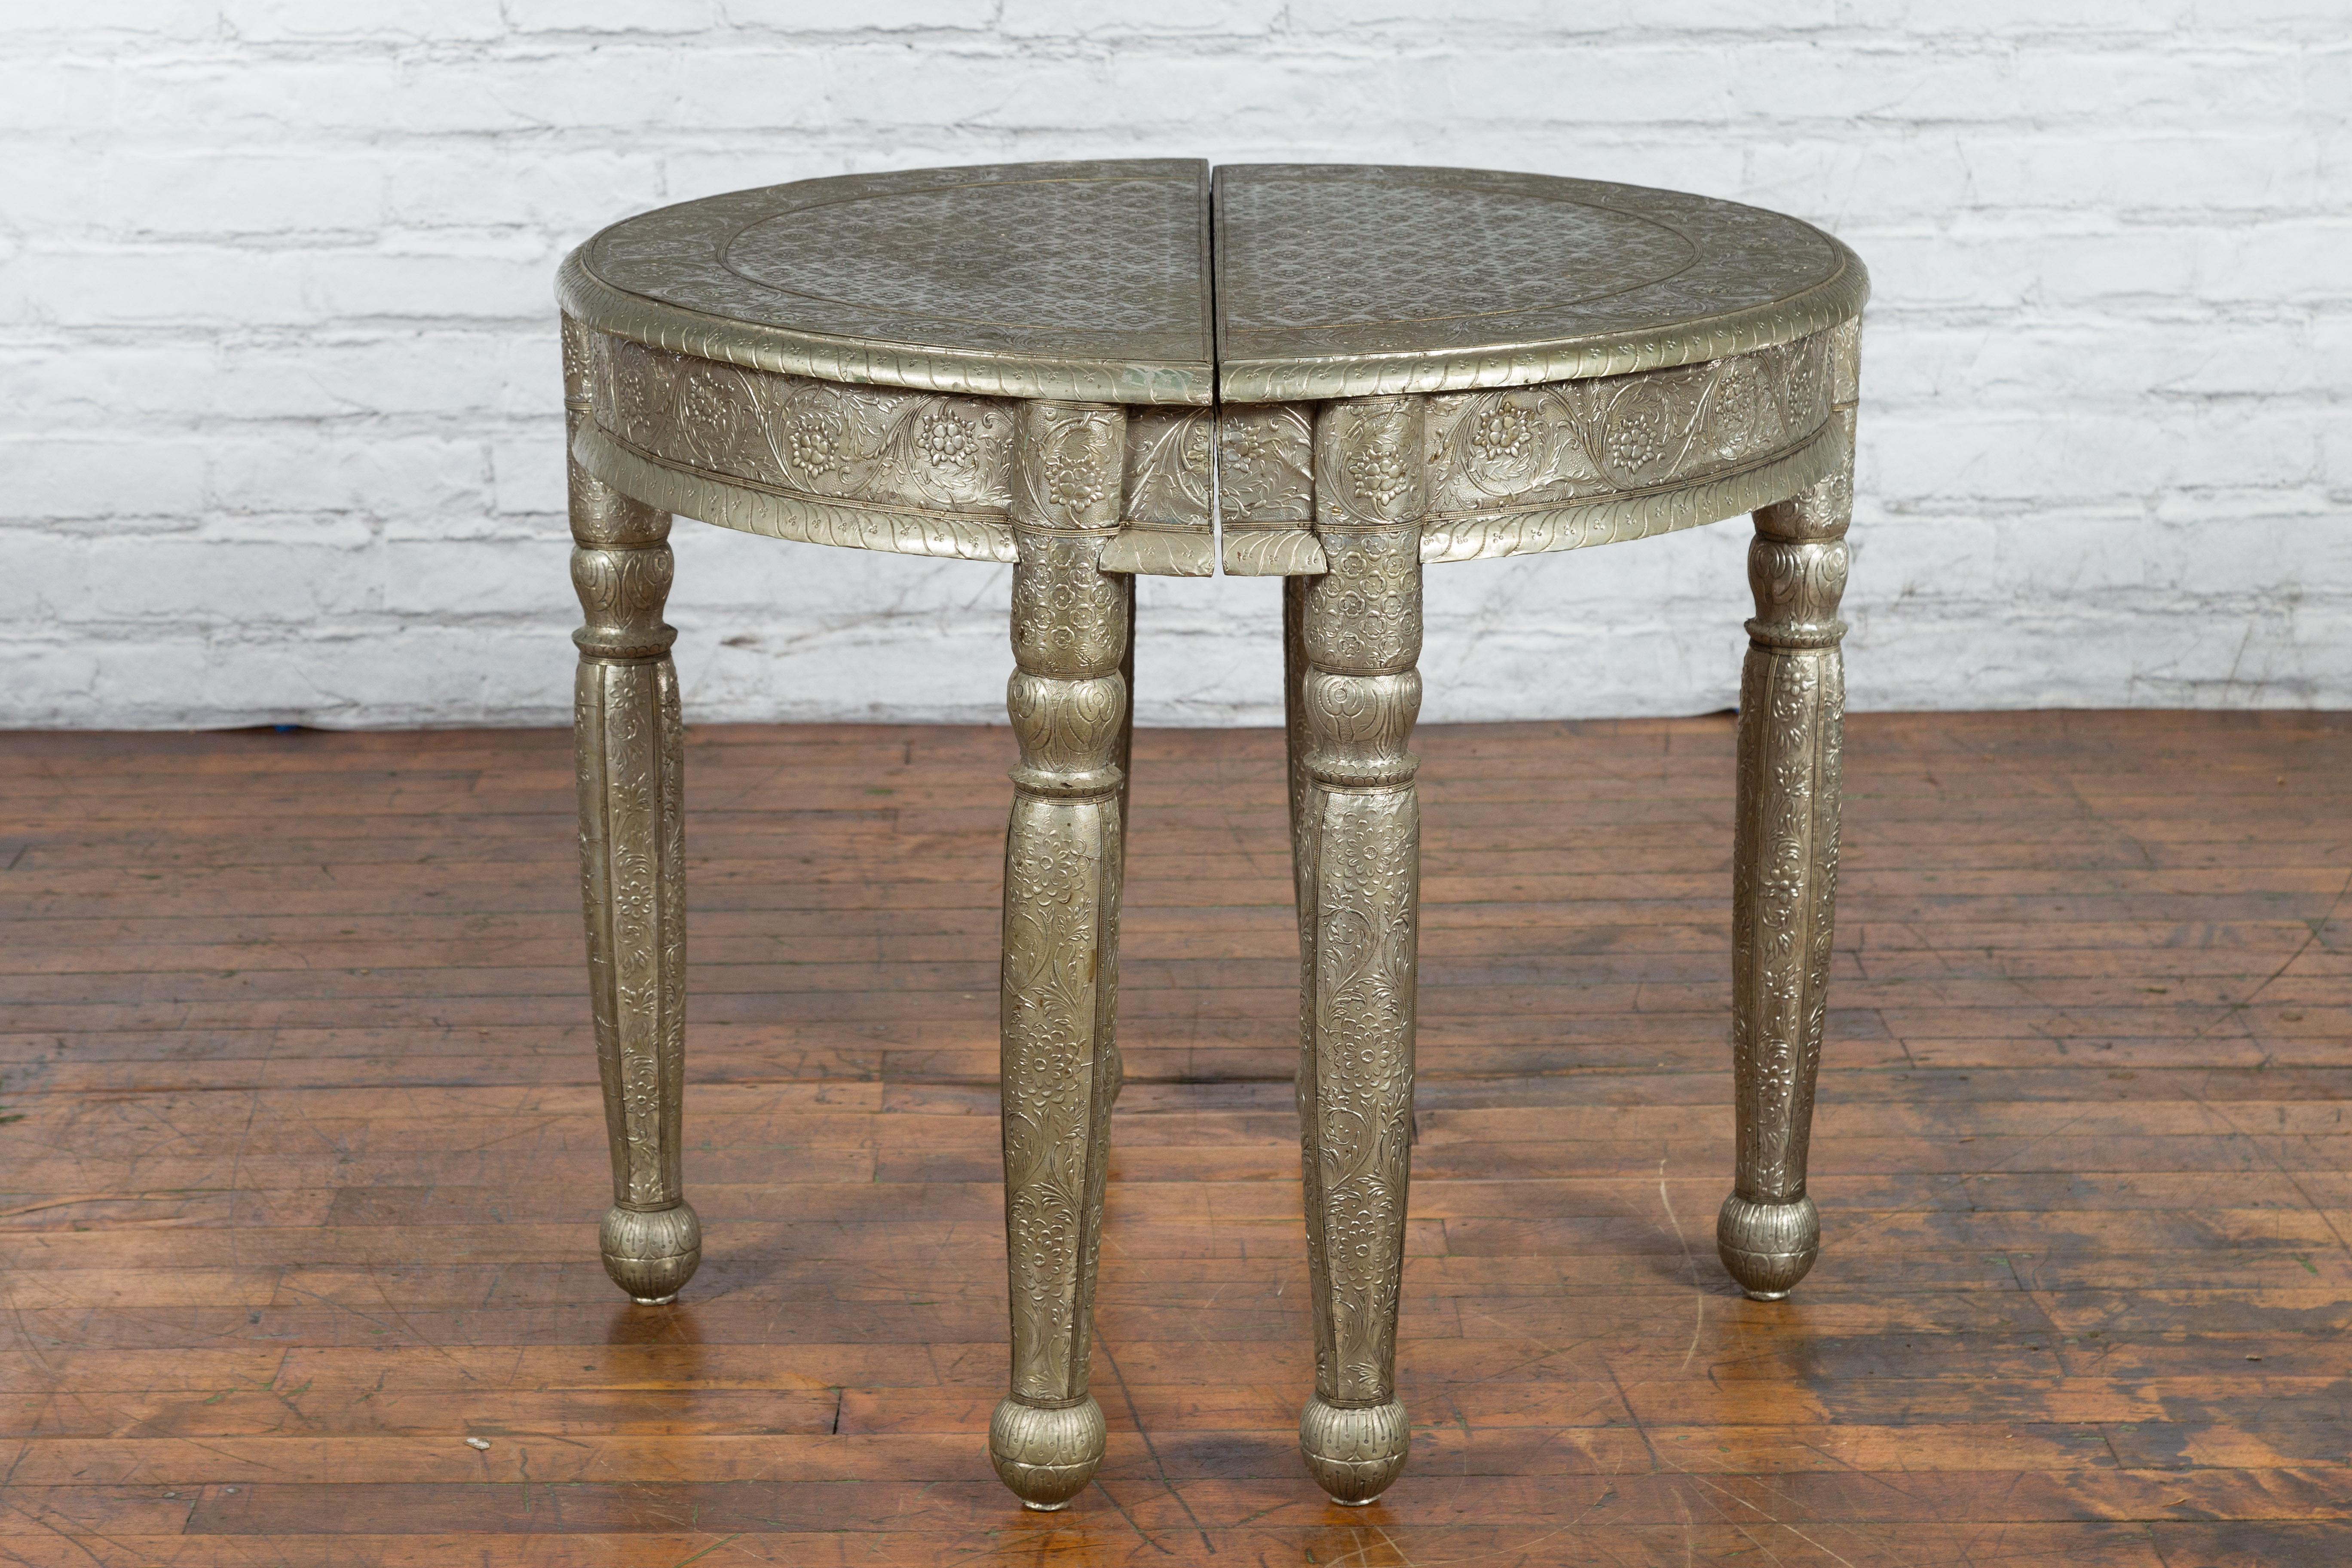 Pair of Indian Metal Sheathing Repoussé Demilune Tables with Floral Arabesques For Sale 11